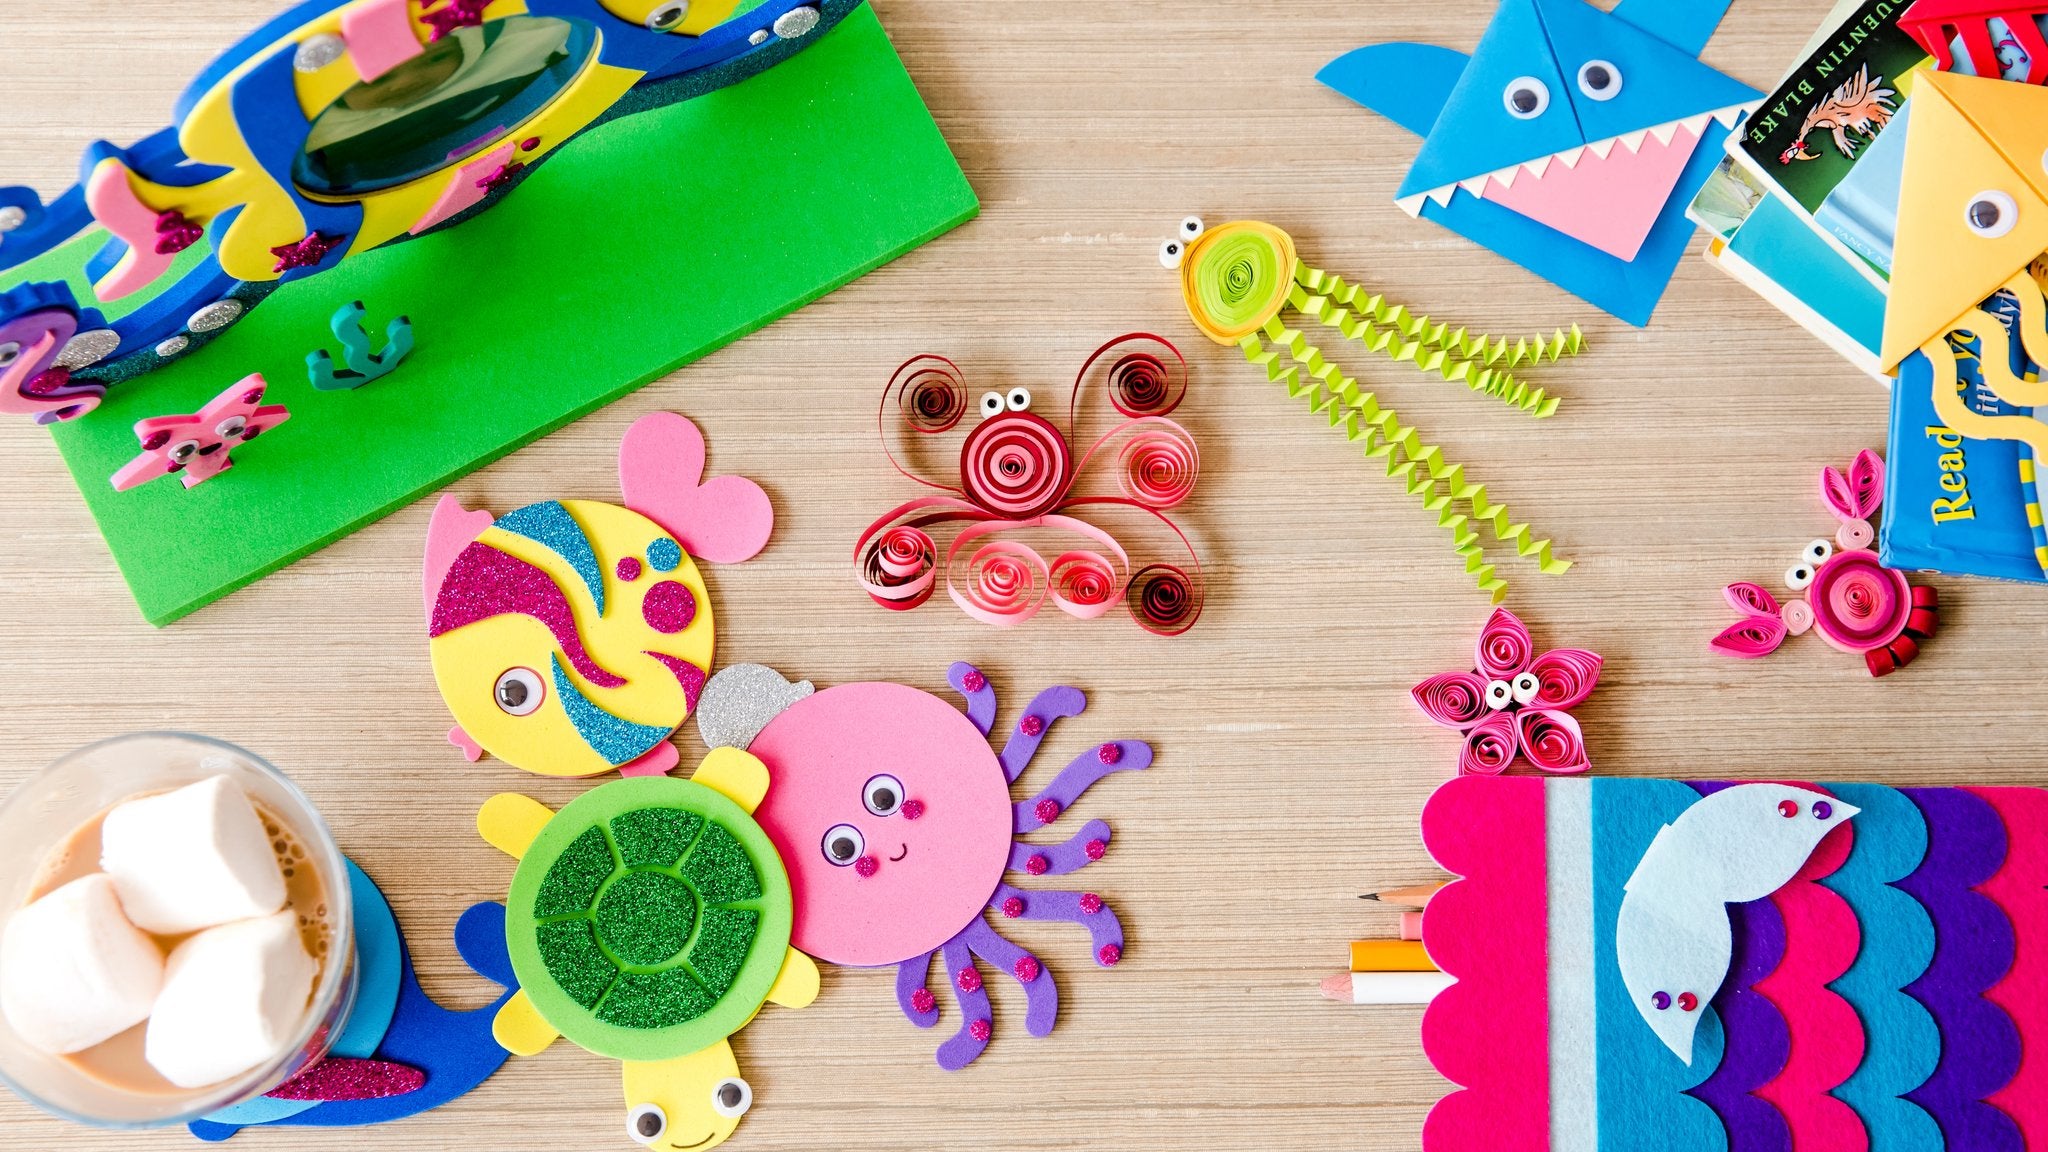 FINALSALE: Craft Kit: 6-in-1 Under The Sea